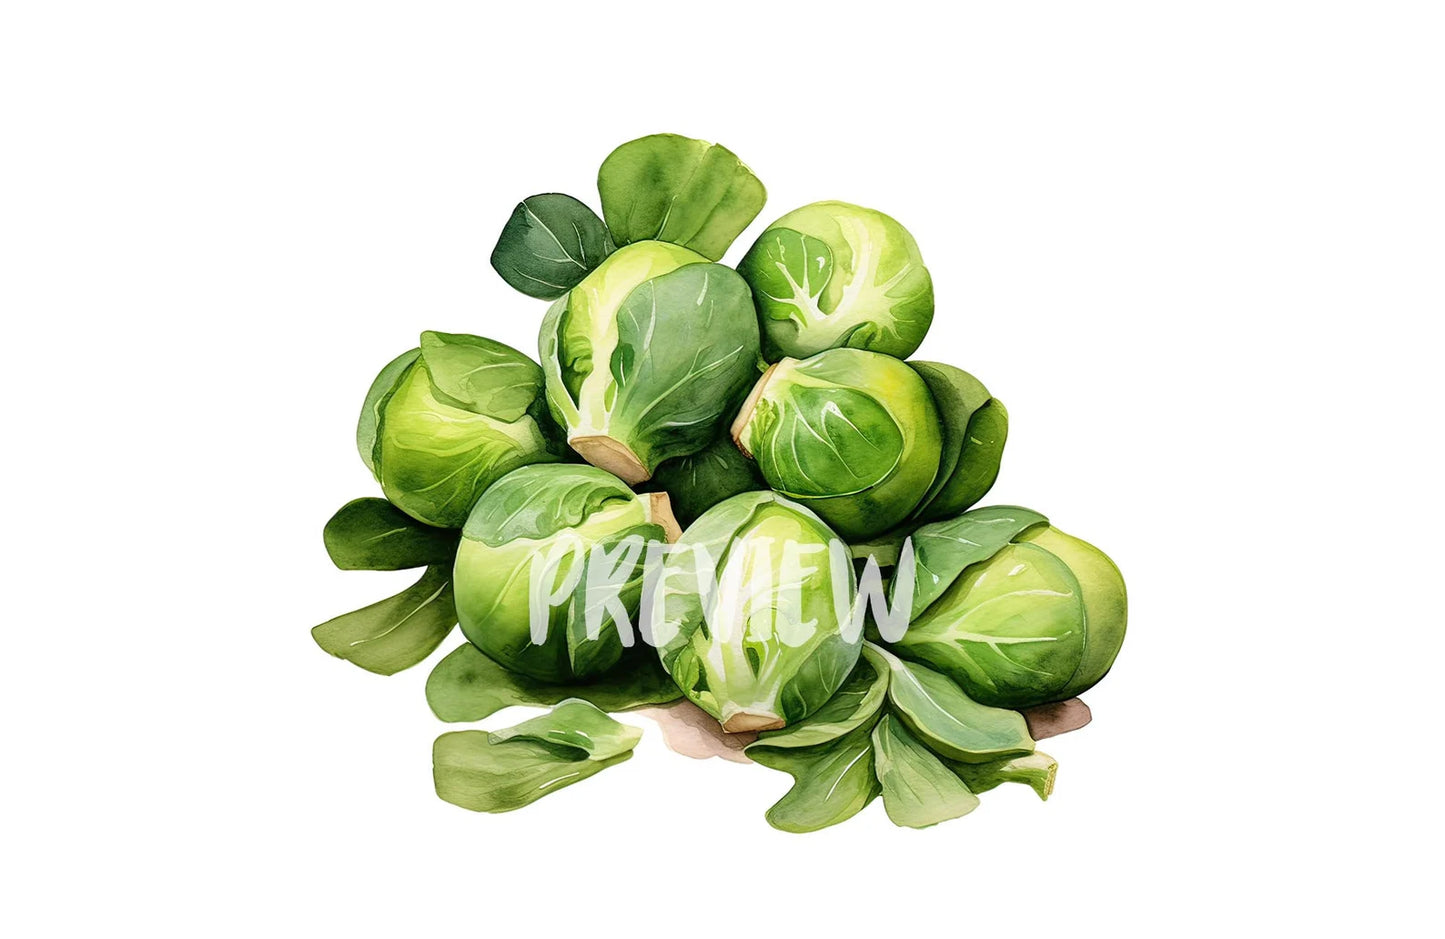 Watercolor Brussels Sprouts Clipart